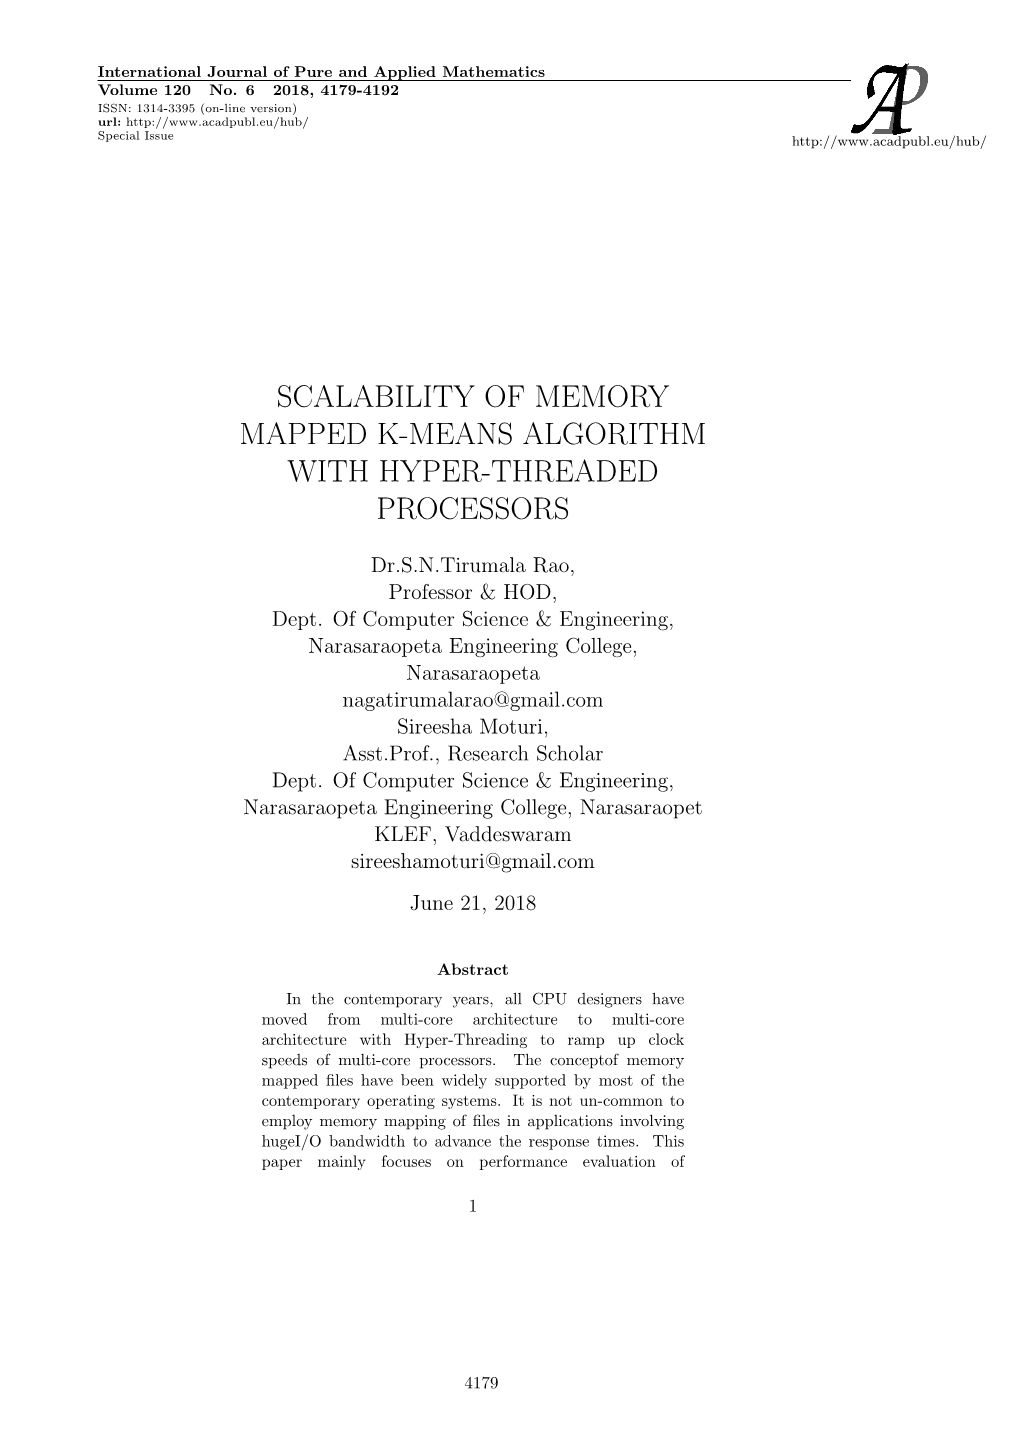 Scalability of Memory Mapped K-Means Algorithm with Hyper-Threaded Processors